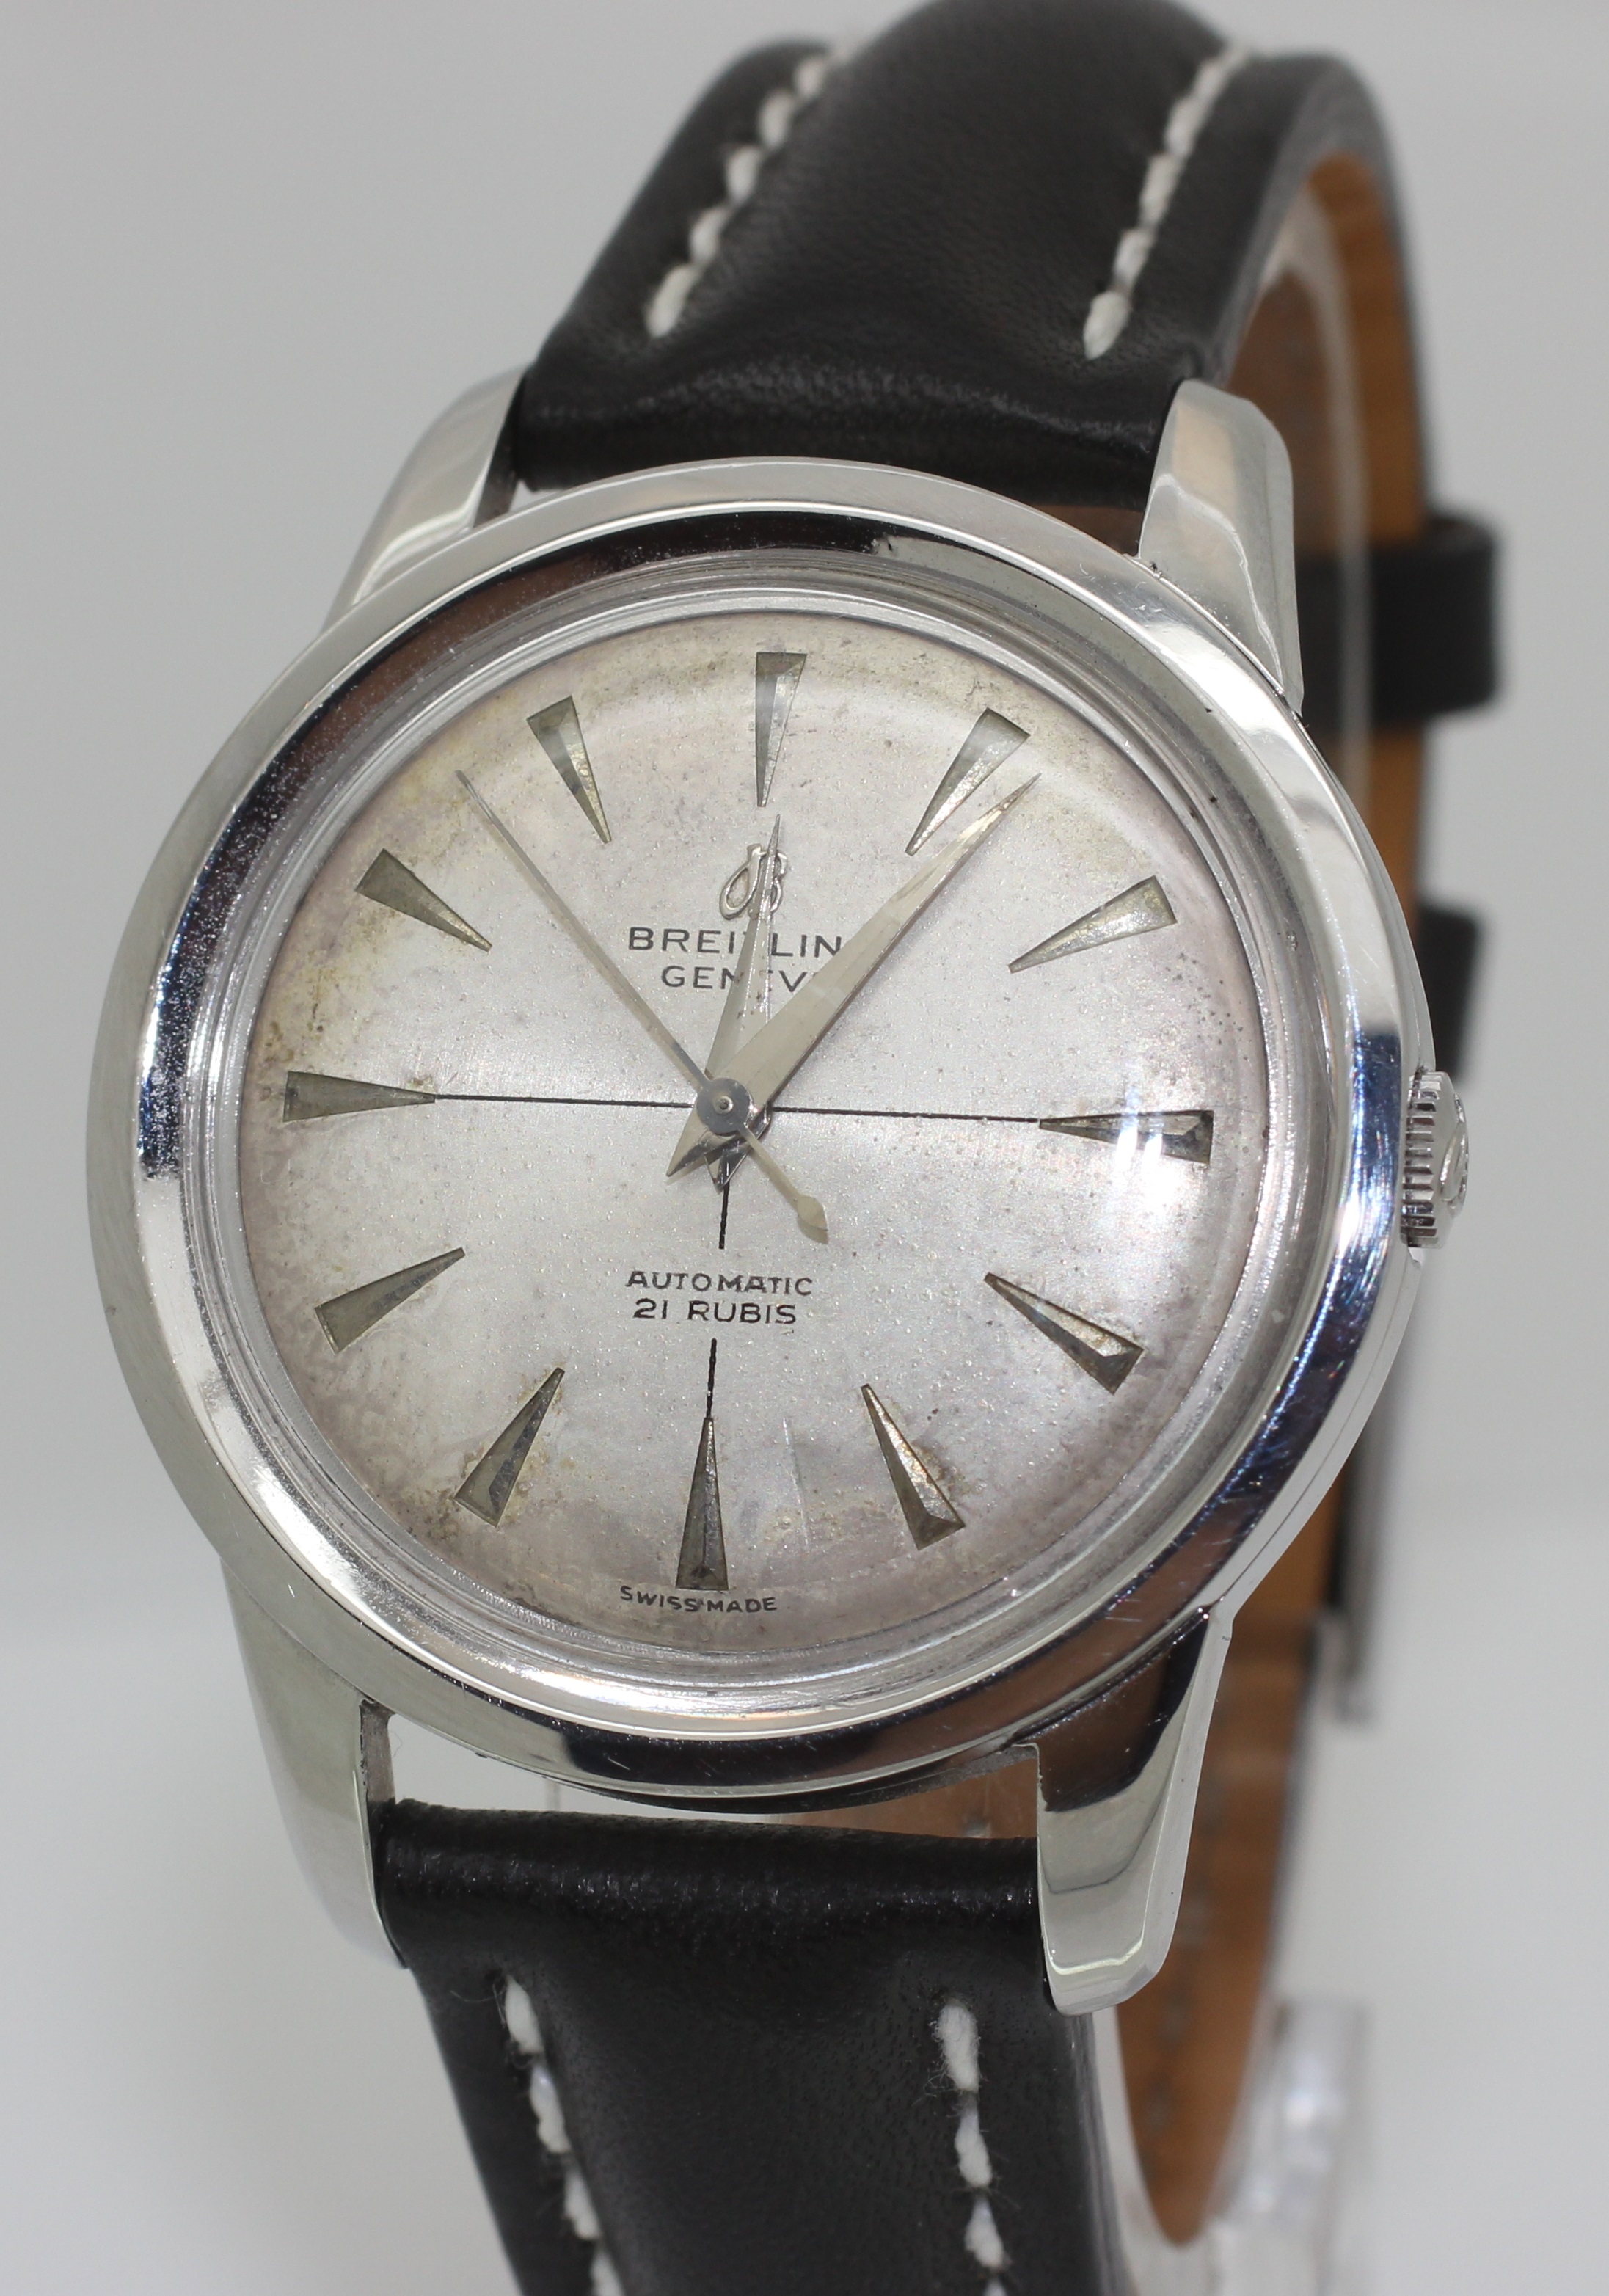 MENS RARE VINTAGE 1950s BREITLING BIDYNATOR 2509 25 AUTOMATIC 35mm JUST SERVICED